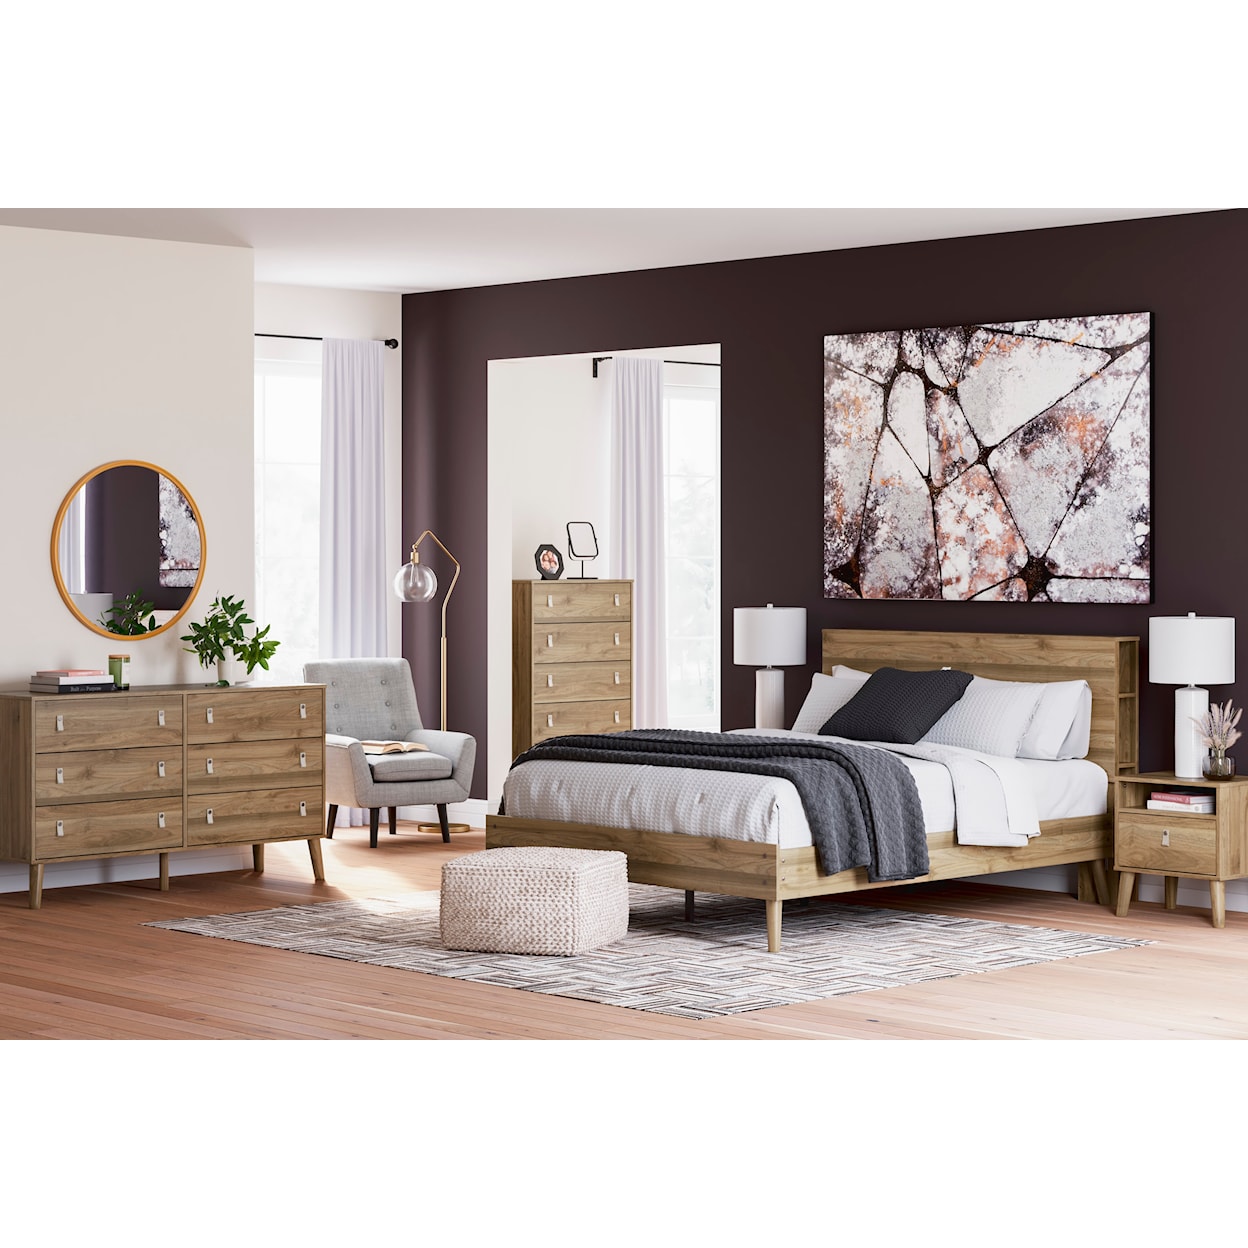 Signature Design by Ashley Furniture Aprilyn Queen Bookcase Bed